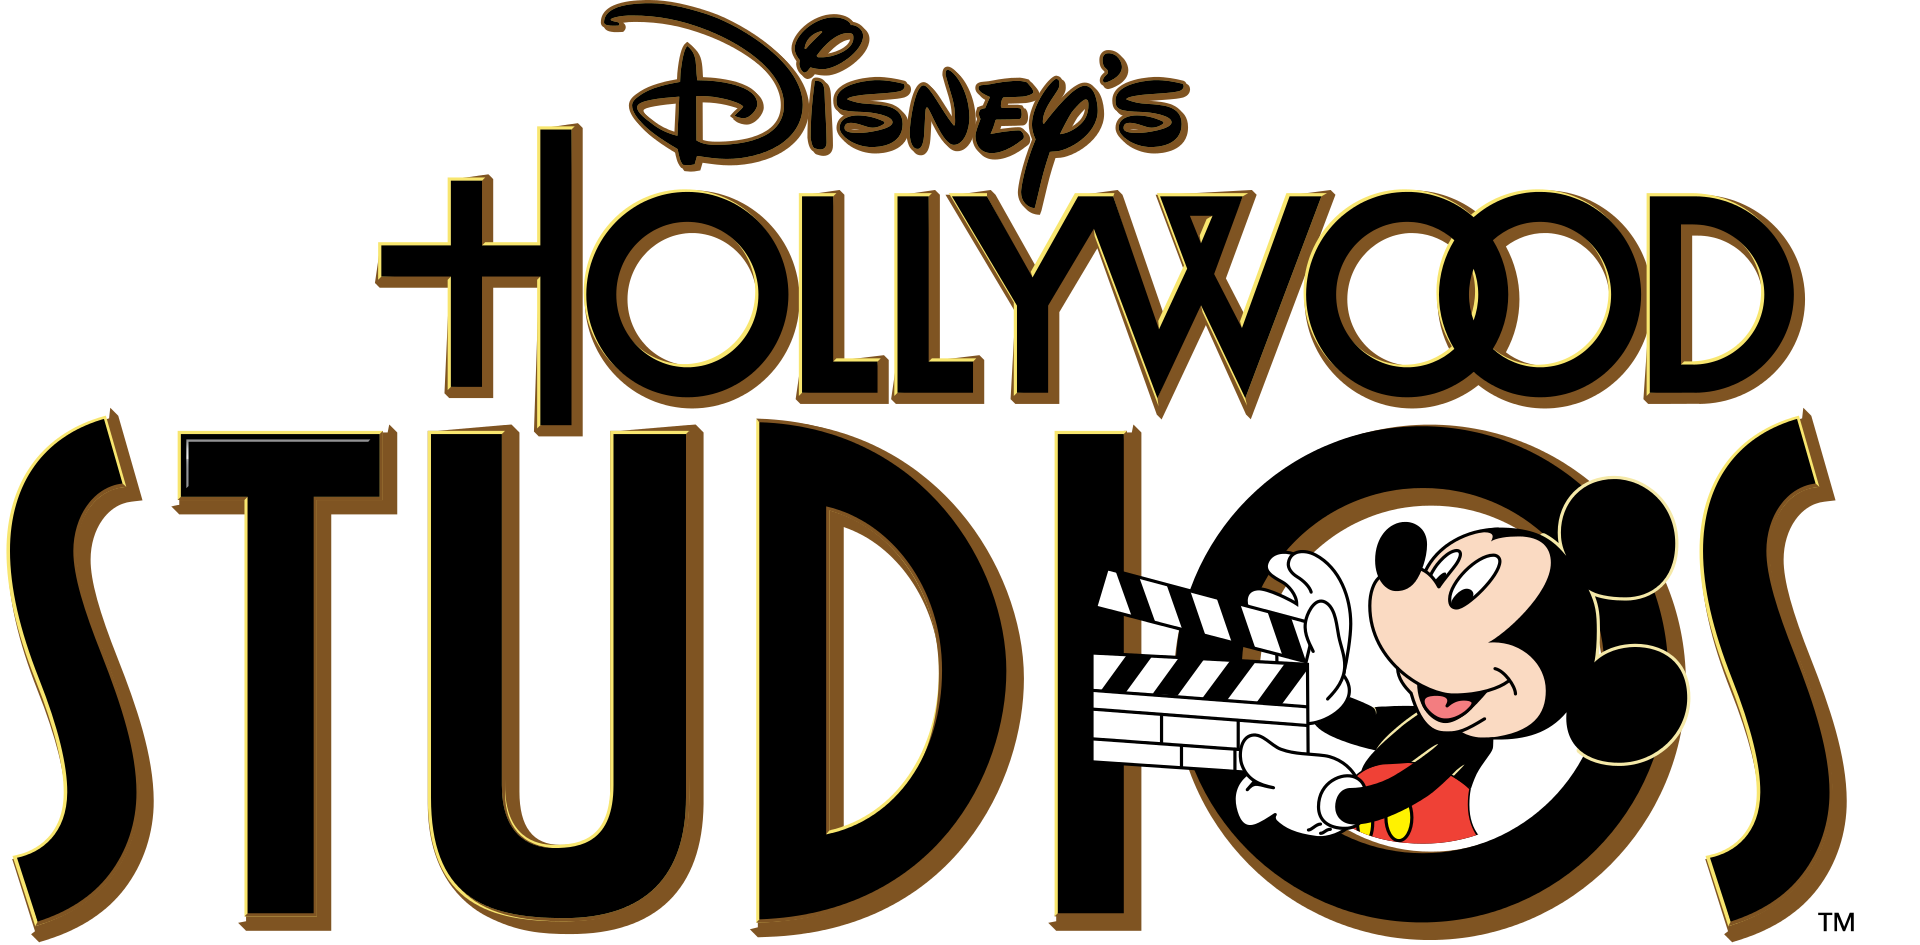 Disney's Hollywood Studios has a new logo and we're wholly uninspired